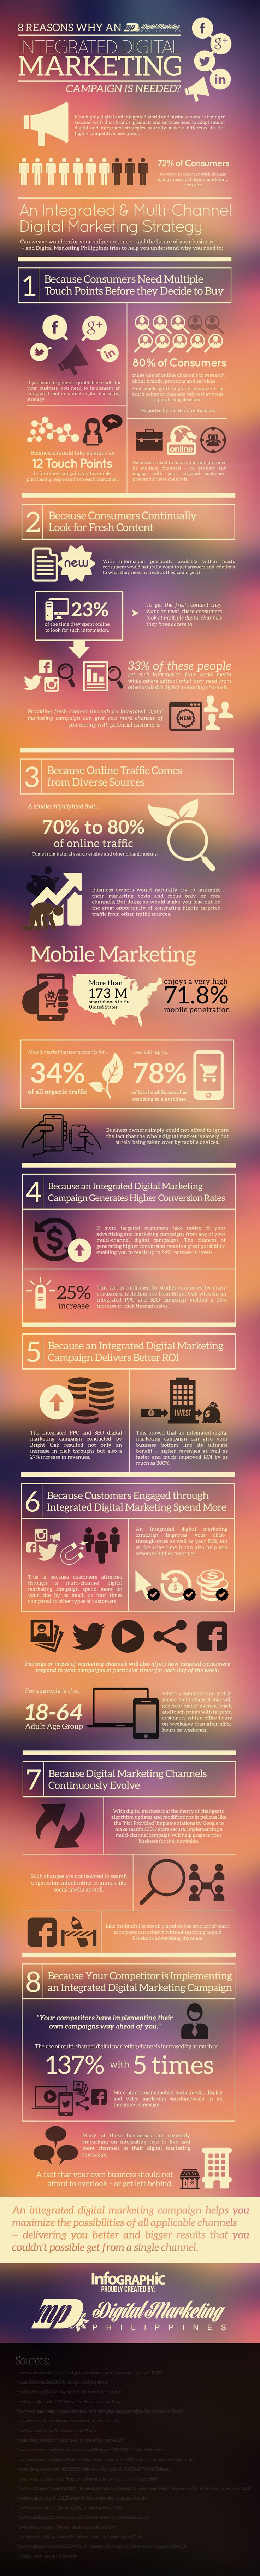 why_a_digital_marketing_campaign_is_needed-1-14-16.jpg